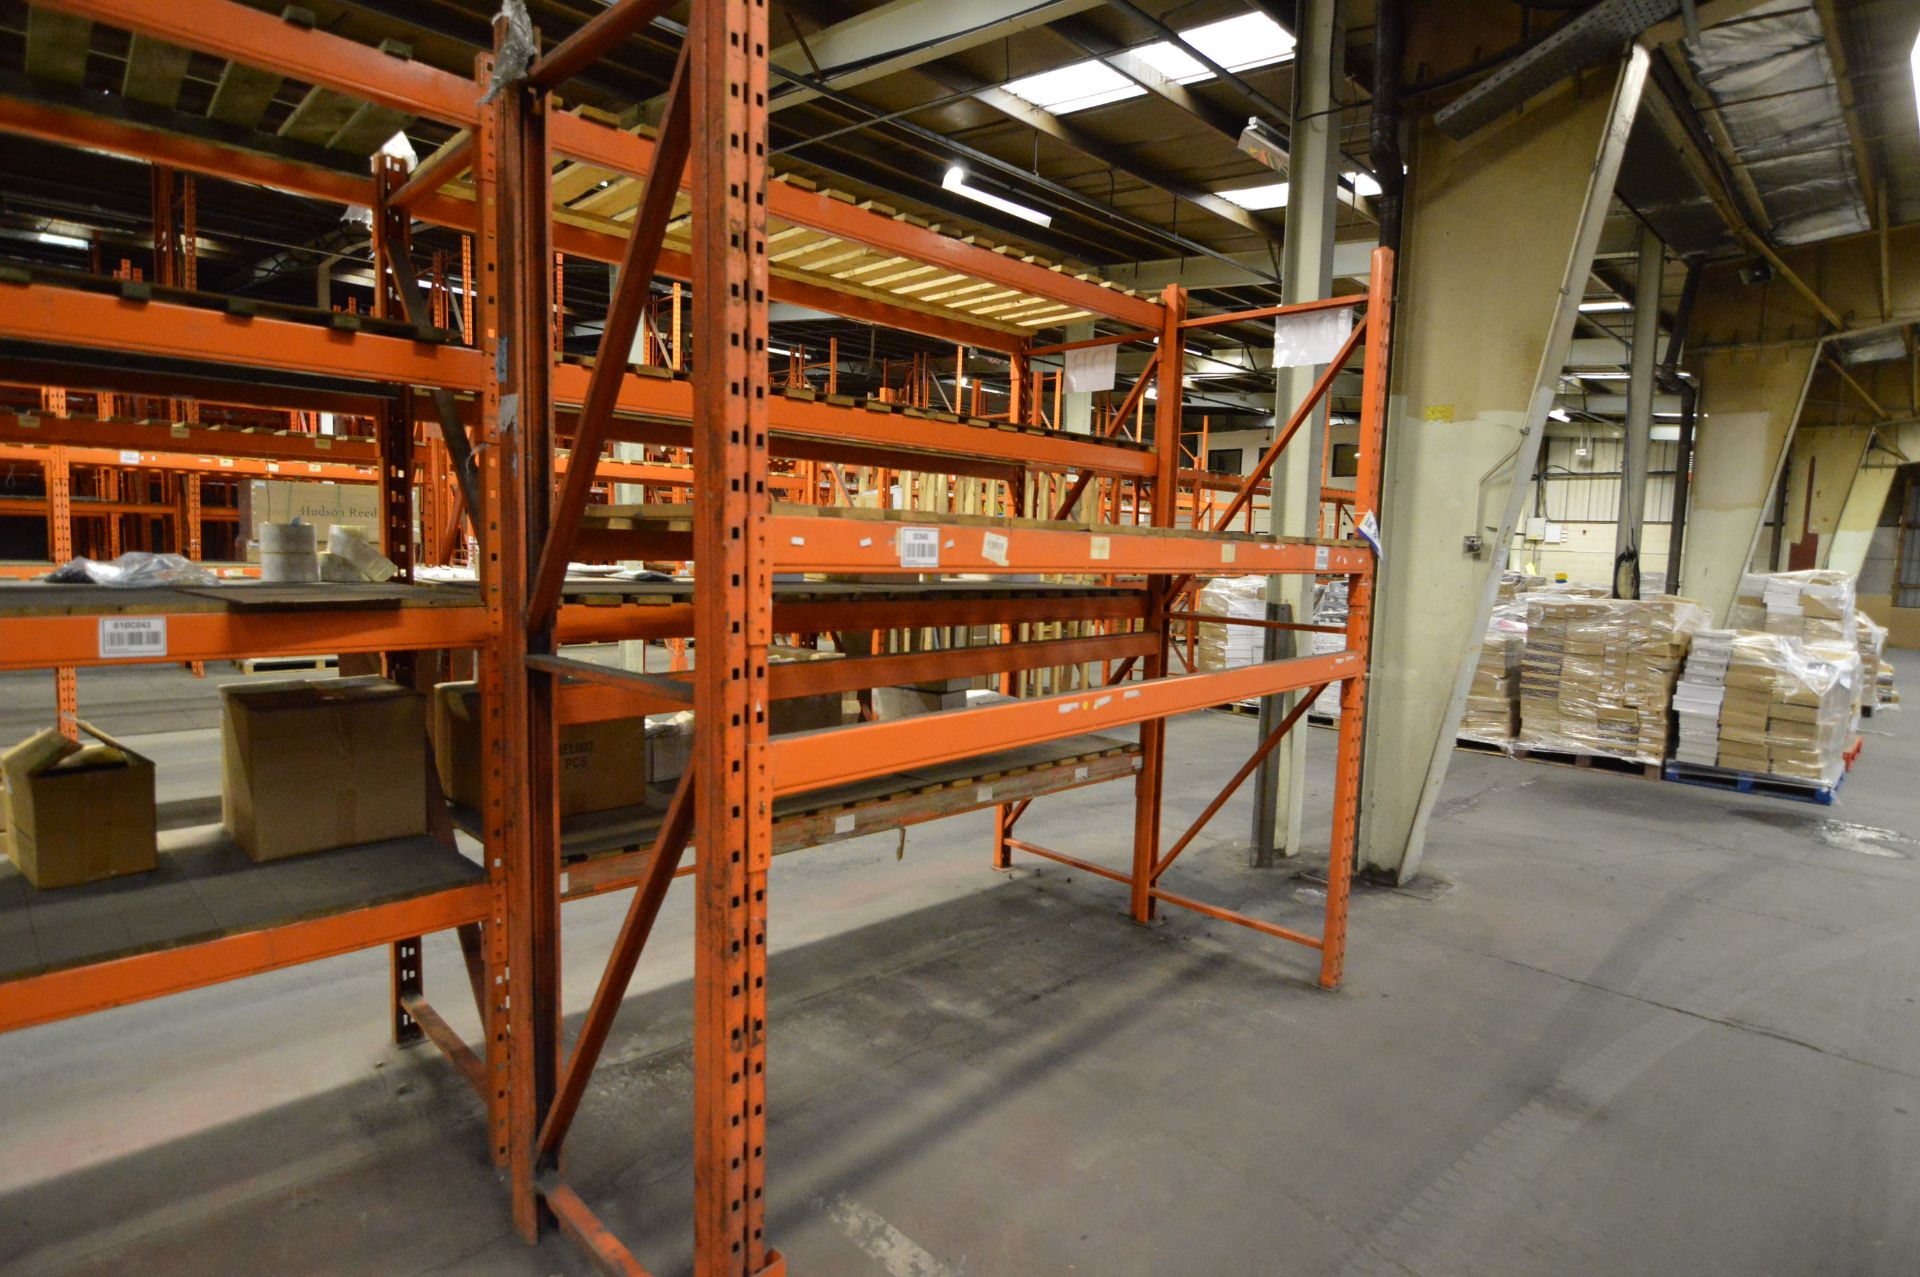 Redirack SD1.70 Single Sided Single Bay Two Tier Pallet Rack, approx. 2.8m long x 900mm x 2.7m high, - Image 2 of 2